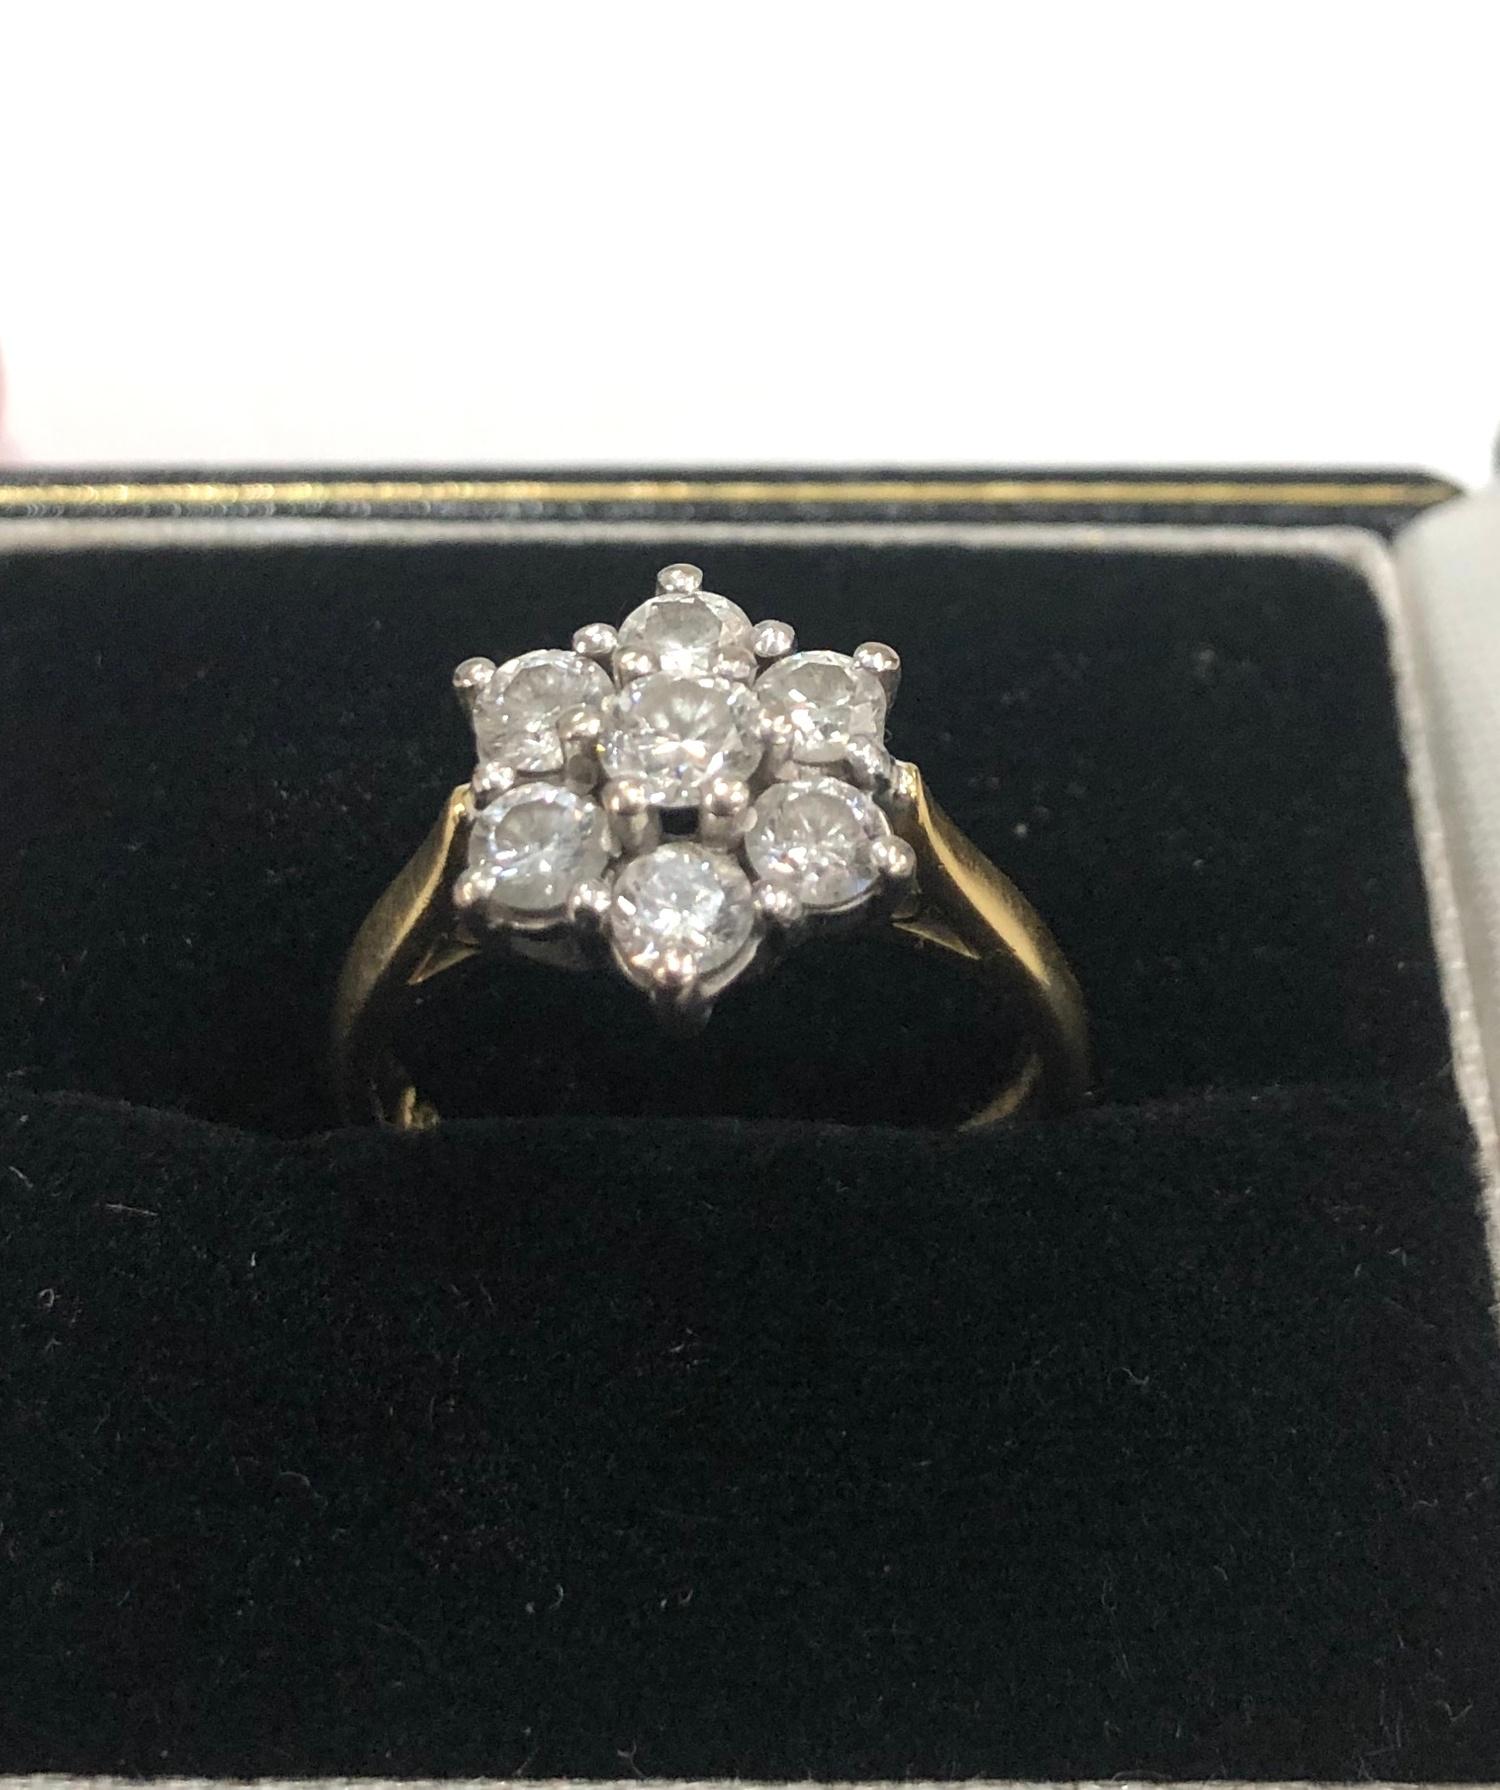 1.00ct diamond flower cluster ring in 18ct gold size M/6.5 - Image 2 of 4